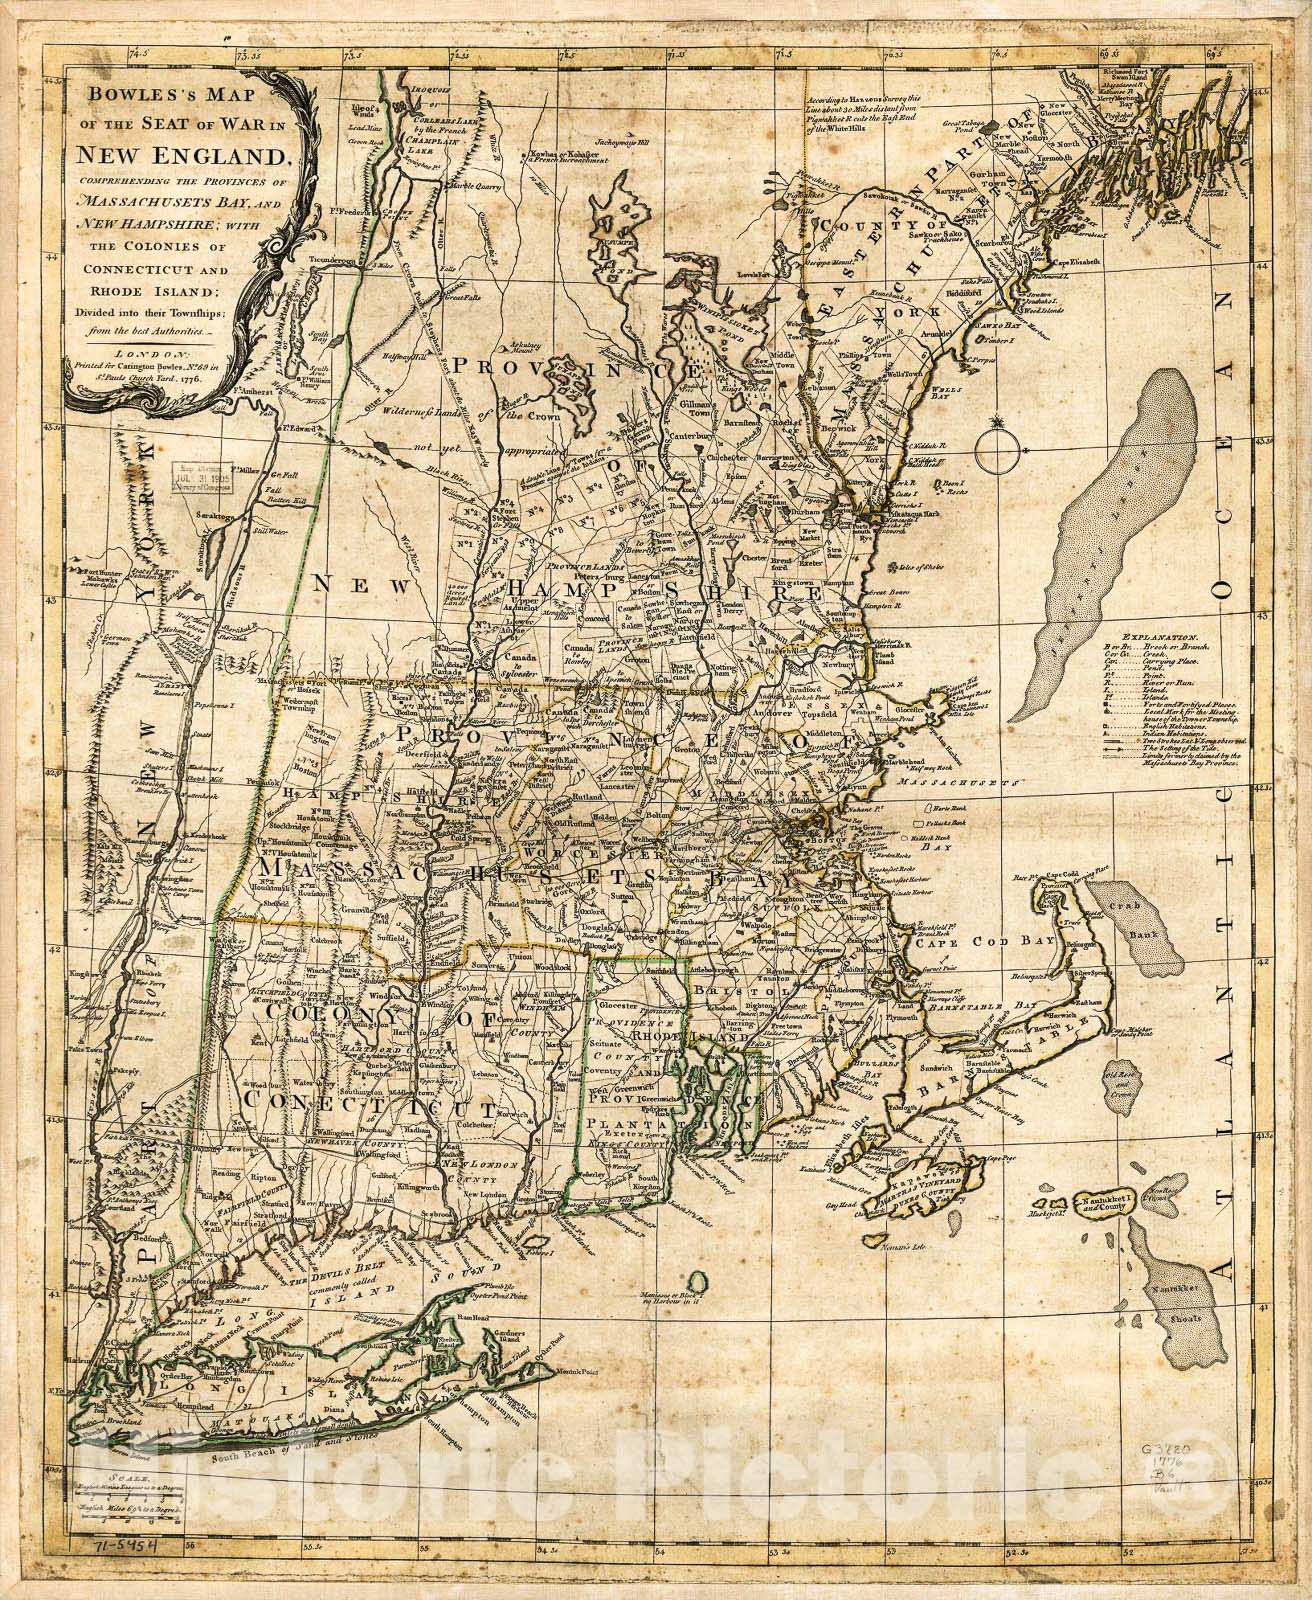 Historic 1776 Map - Bowles's map of The seat of war in New England. Comprehending The Provinces of Massachusets Bay, and New Hampshire; with The Colonies of Connecticut and Rhode Island